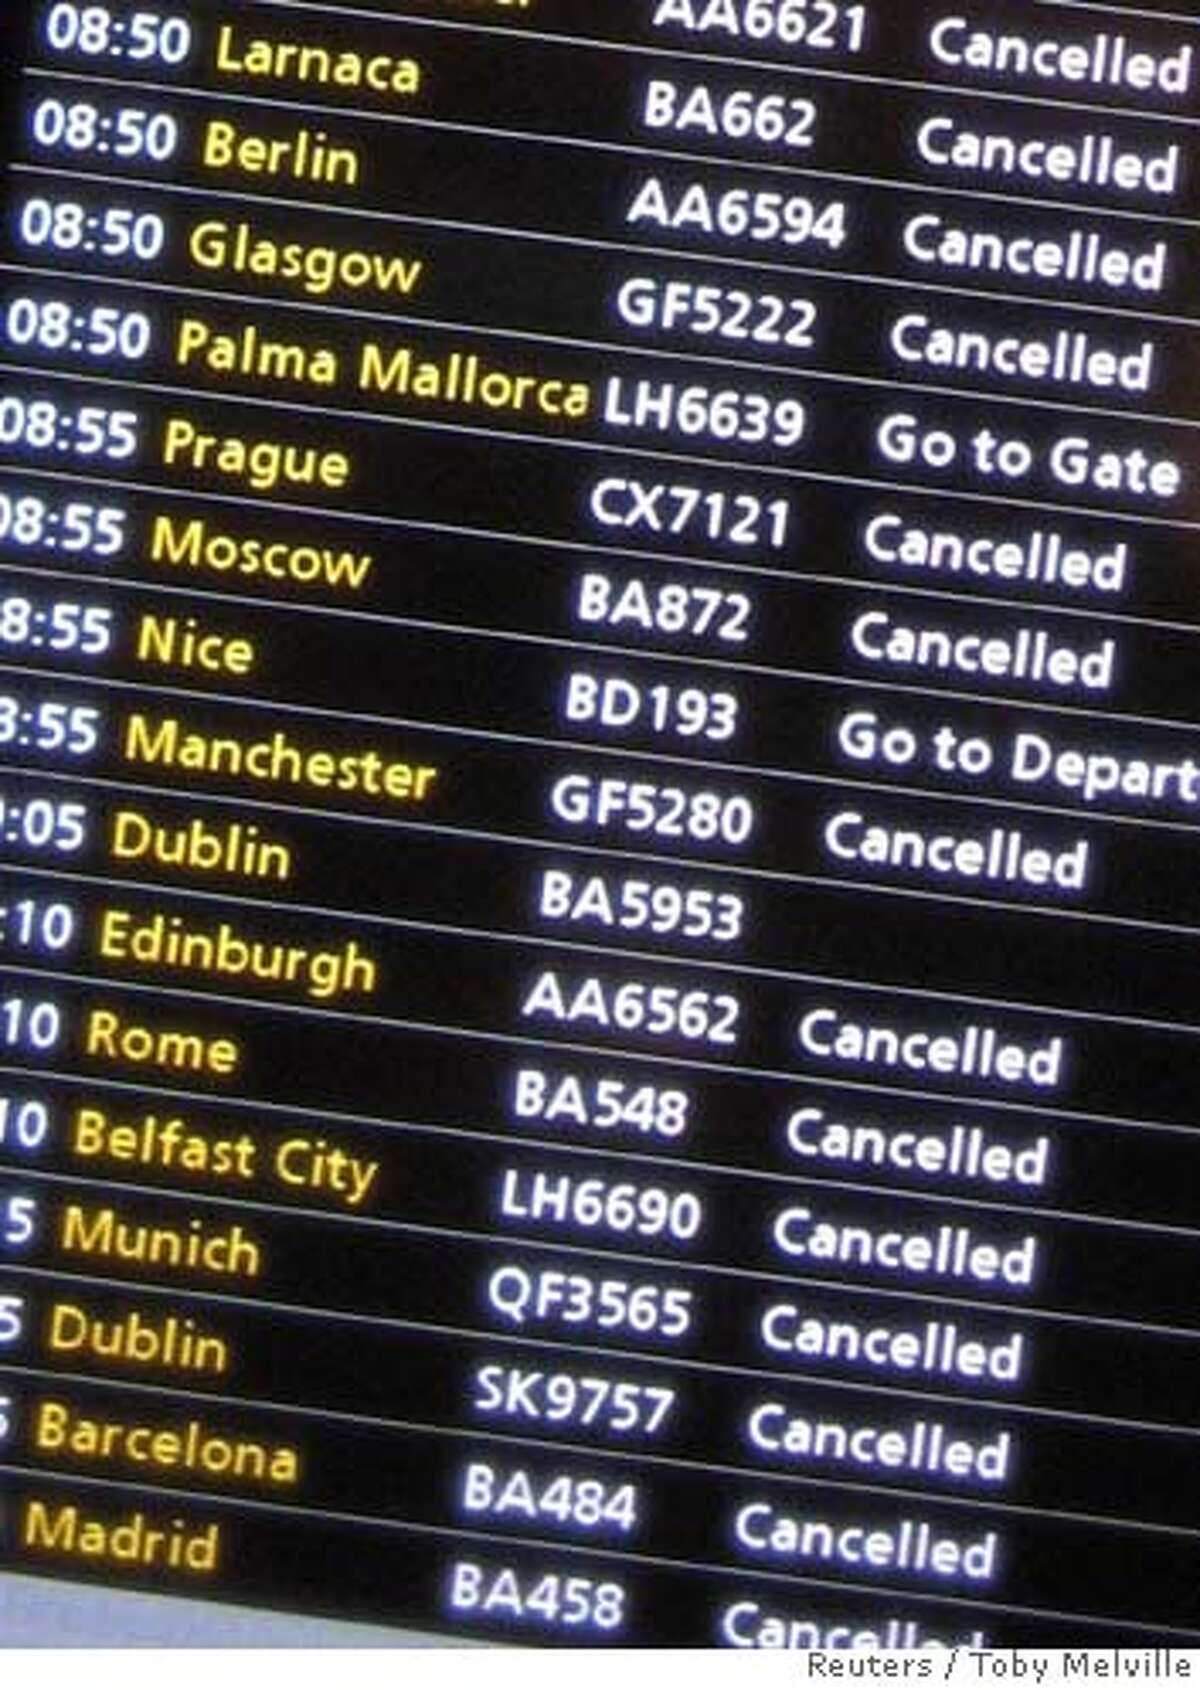 A screen shows cancelled flights at Terminal One of Heathrow Airport in London, August 10, 2006. British police said on Thursday they had thwarted a plot to blow up aircraft in mid-flight between Britain and the United States and arrested more than 20 people. REUTERS/Toby Melville (BRITAIN)